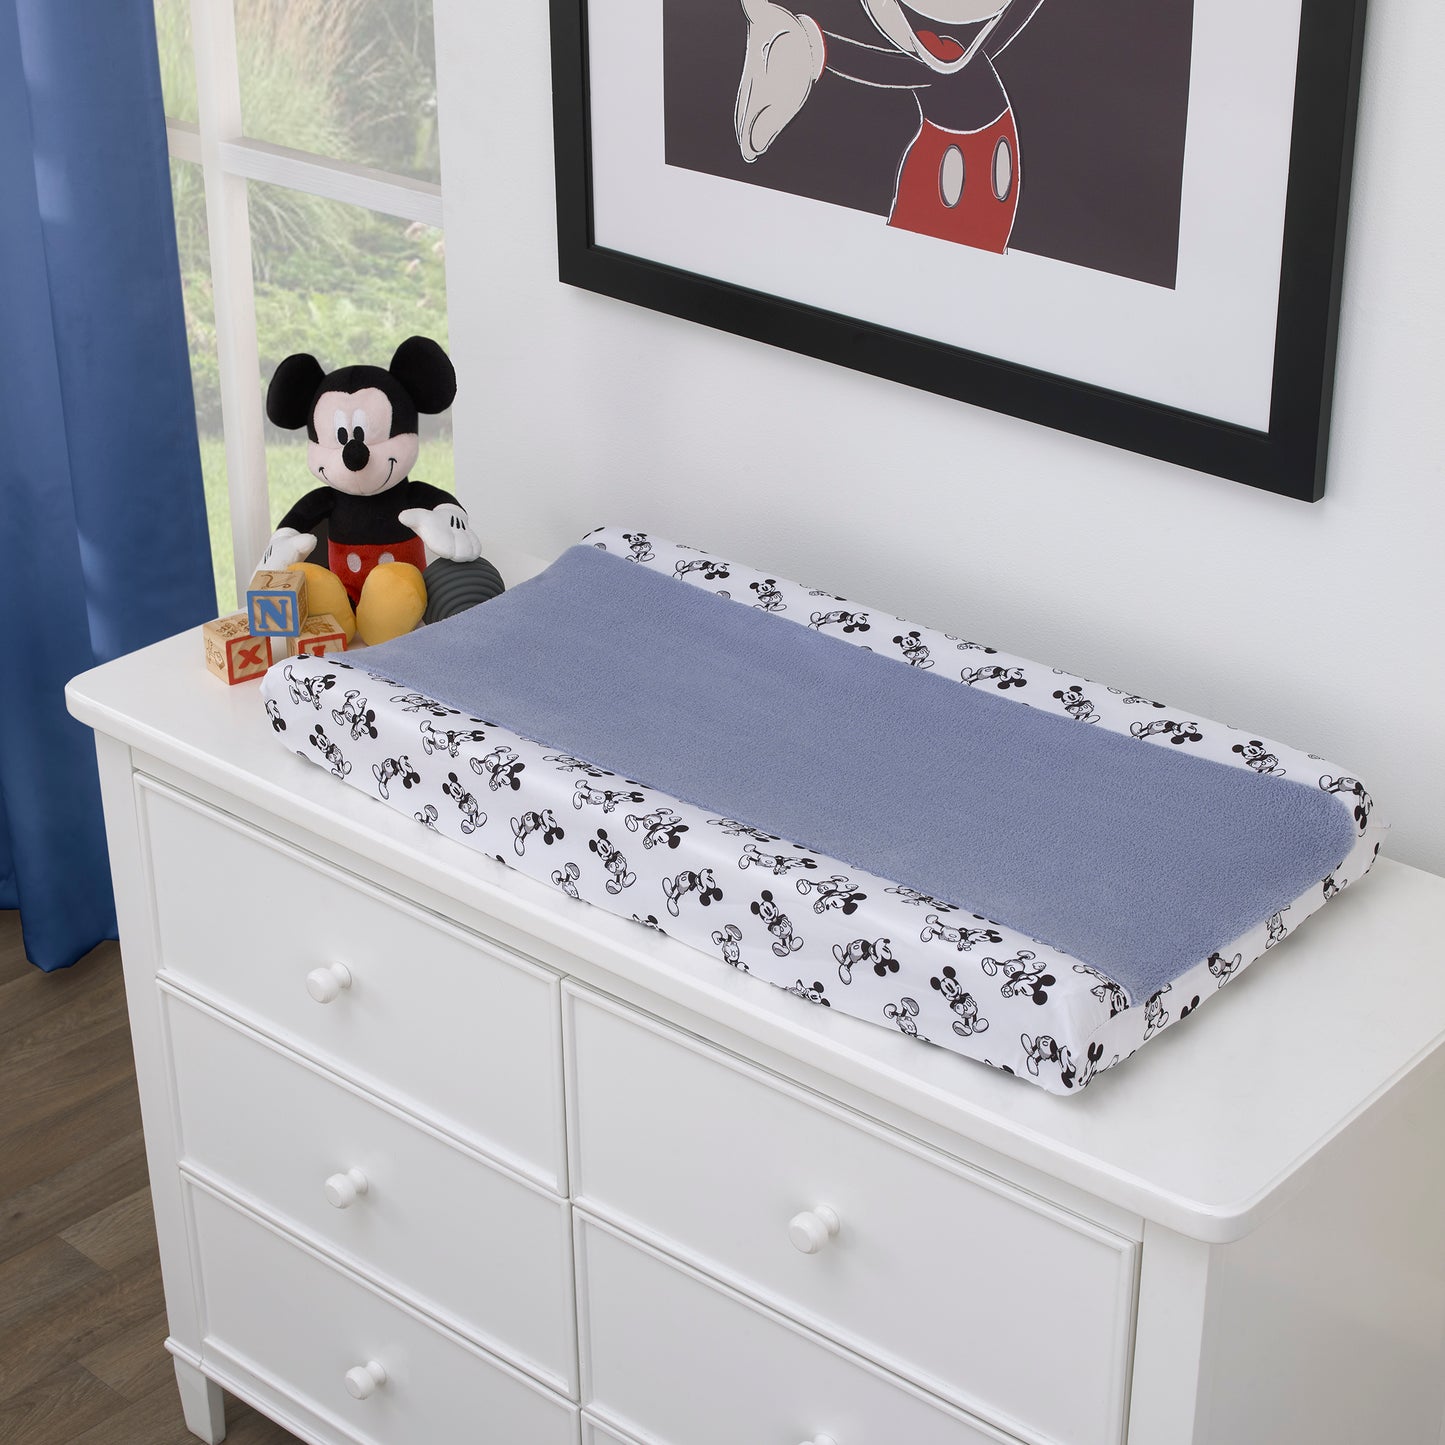 Disney Mickey Mouse - Timeless Mickey Super Soft Baby Blue Changing Pad Cover